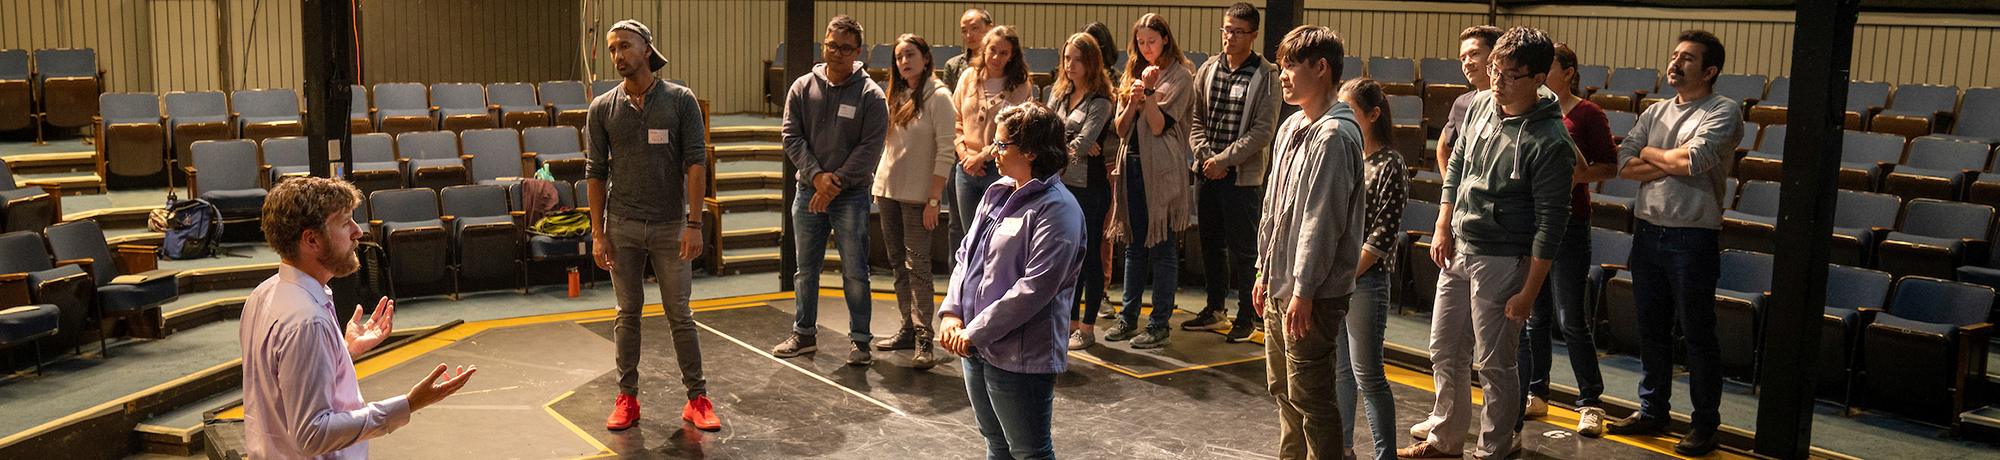 The first session of an mprov workshop for graduate students in Wyatt Theatre on October 29, 2019. This workshop is taught by Lucas Hatton, a UC Davis MFA.